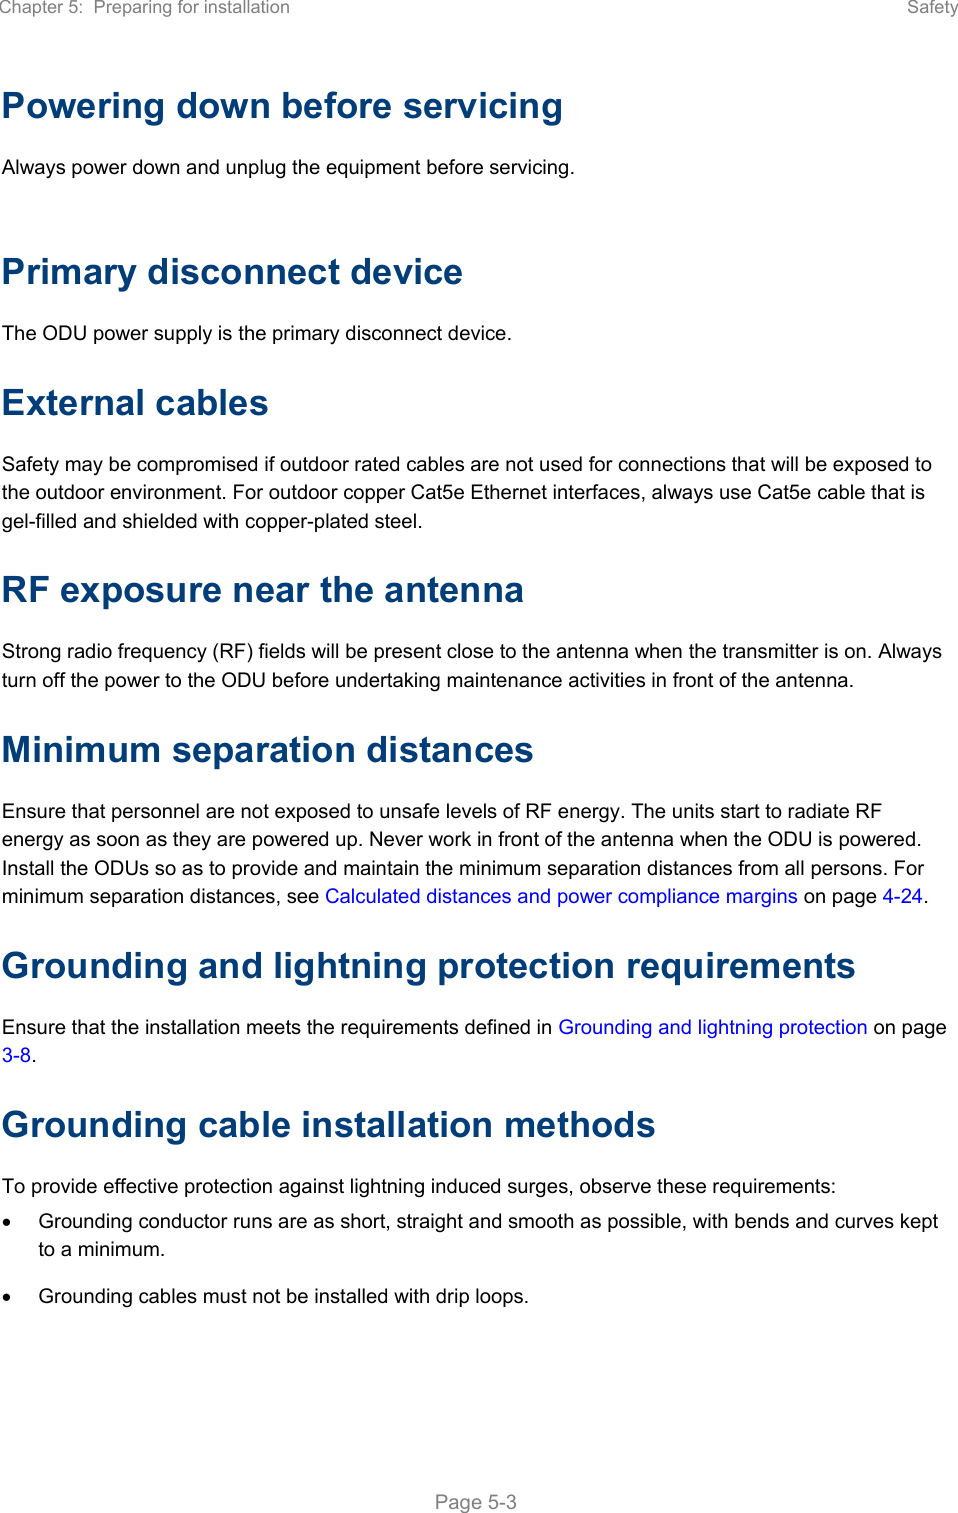 Page 233 of Cambium Networks 50450M 5GHz Point to MultiPoint Multi User MIMO Access Point User Manual PART1